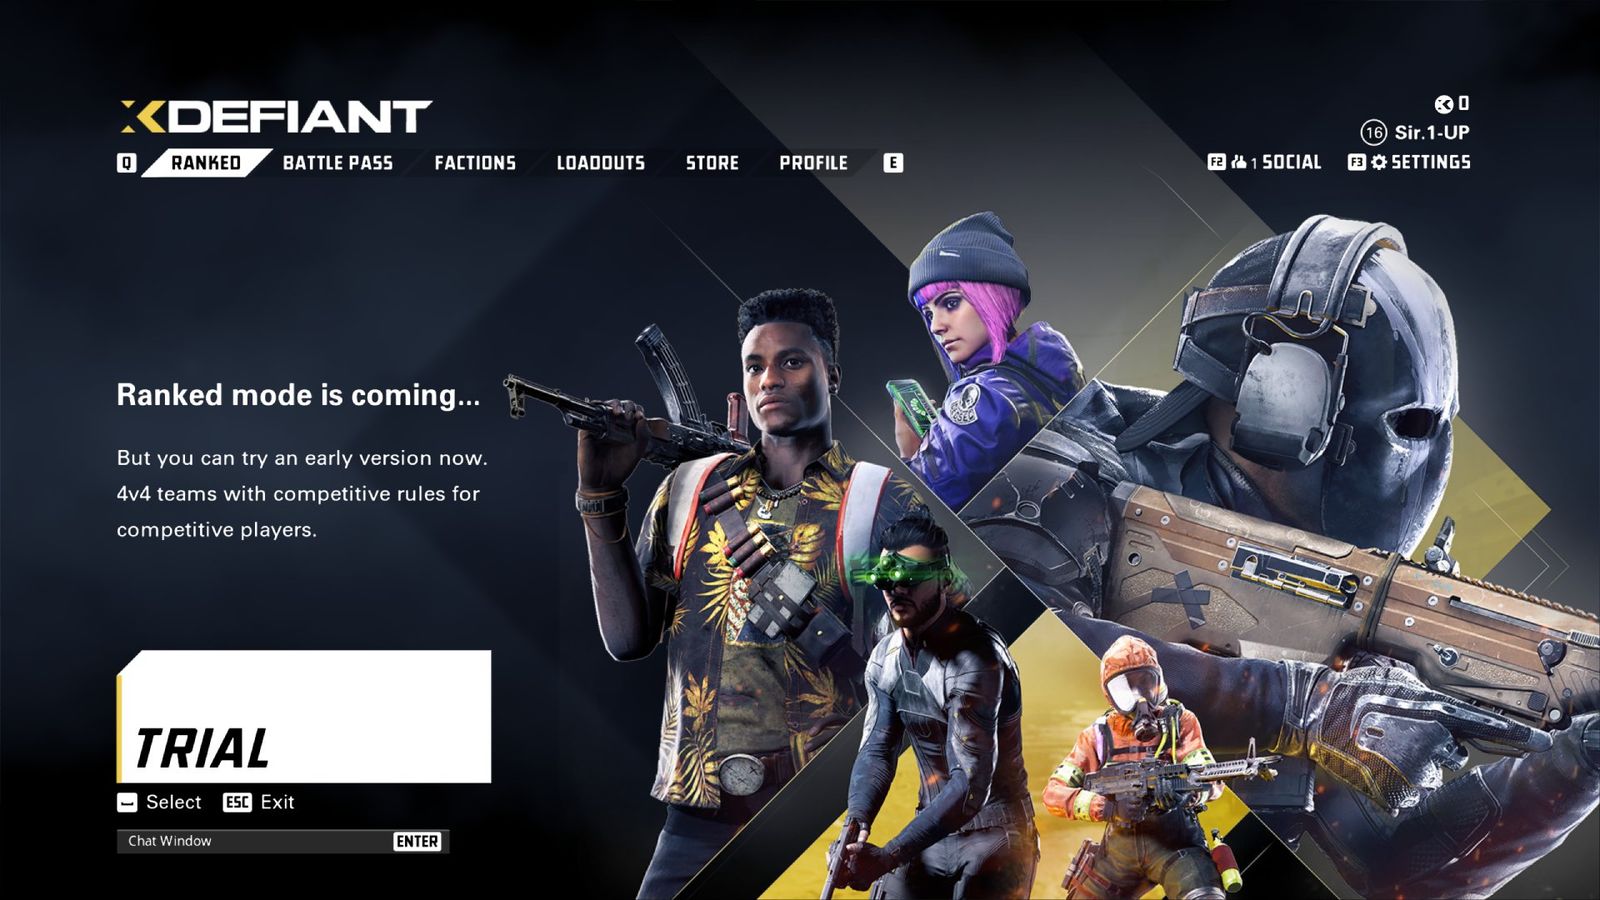 The Ranked Trial Run page in the main menu of XDefiant, with various characters posing in the background and a brief description of Ranked Play.